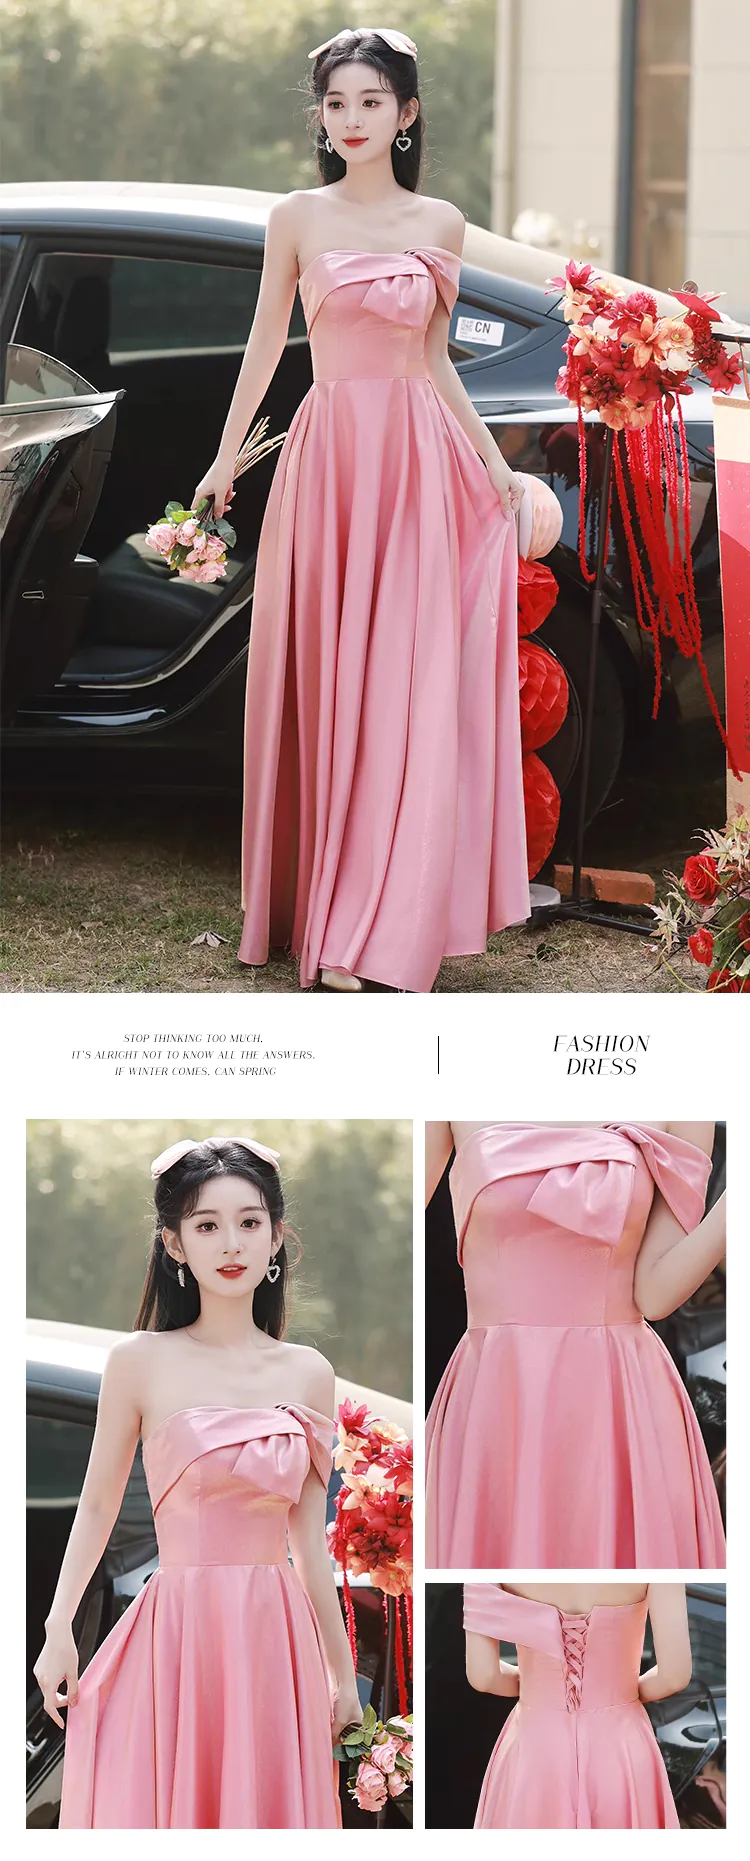 Charming-Pink-Satin-Bridesmaid-Dress-Short-Sleeve-Prom-Evening-Gown22